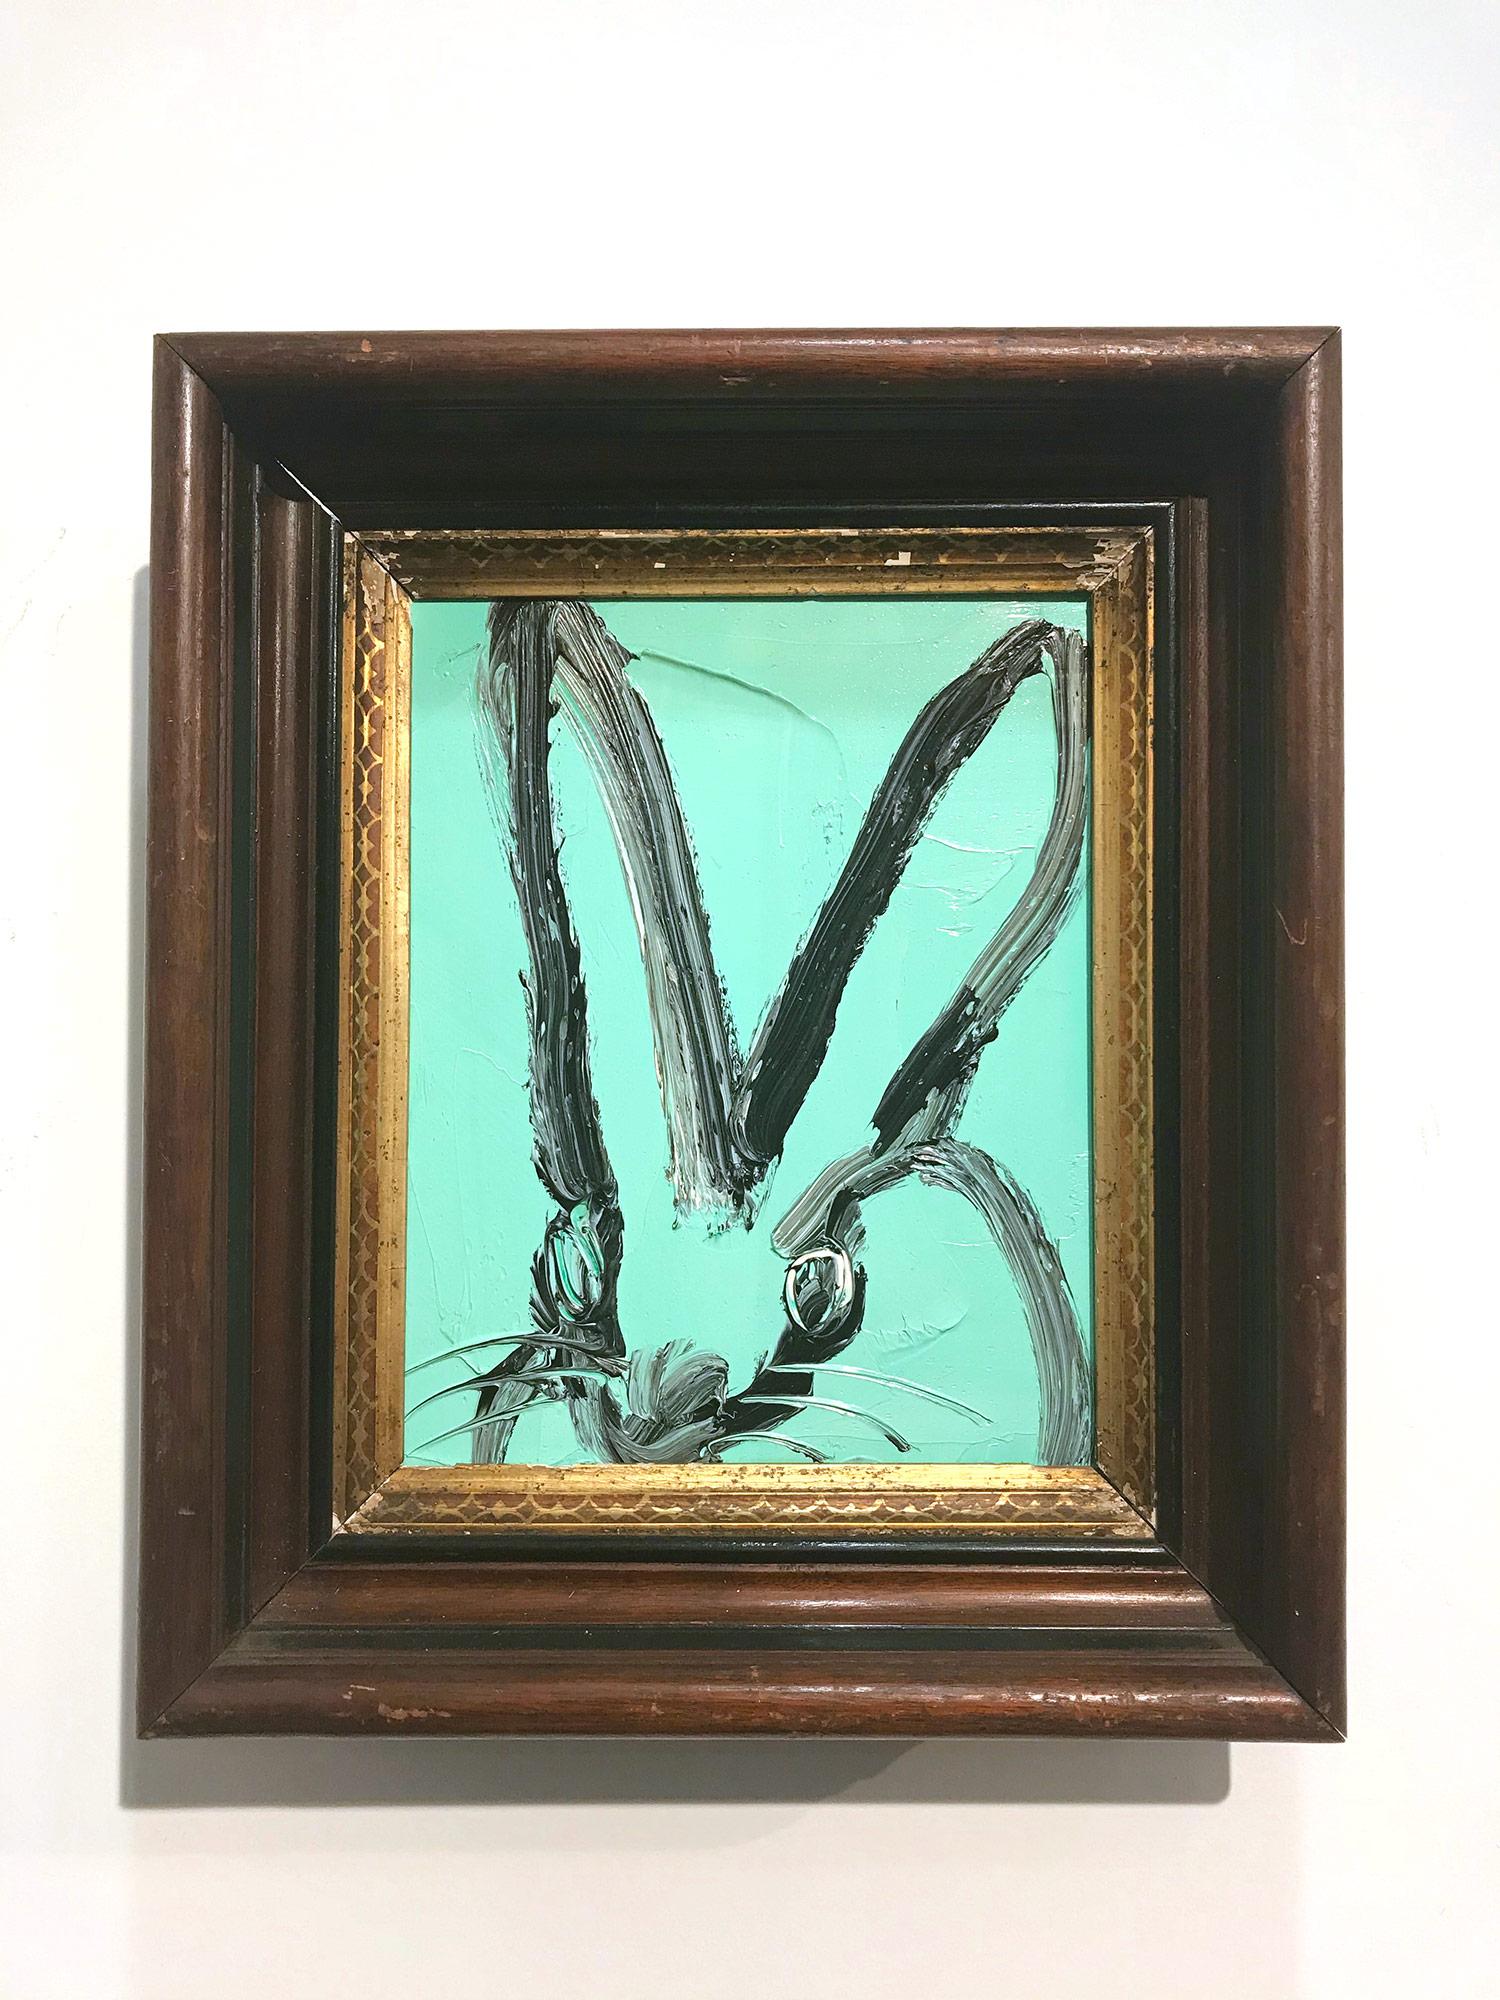 A wonderful composition of one of Slonem's most iconic subjects, Bunnies. This piece depicts a gestural figure of a black bunny on a Periwinkle blue background with thick use of paint. It is housed in a wonderful carved wood frame. Inspired by